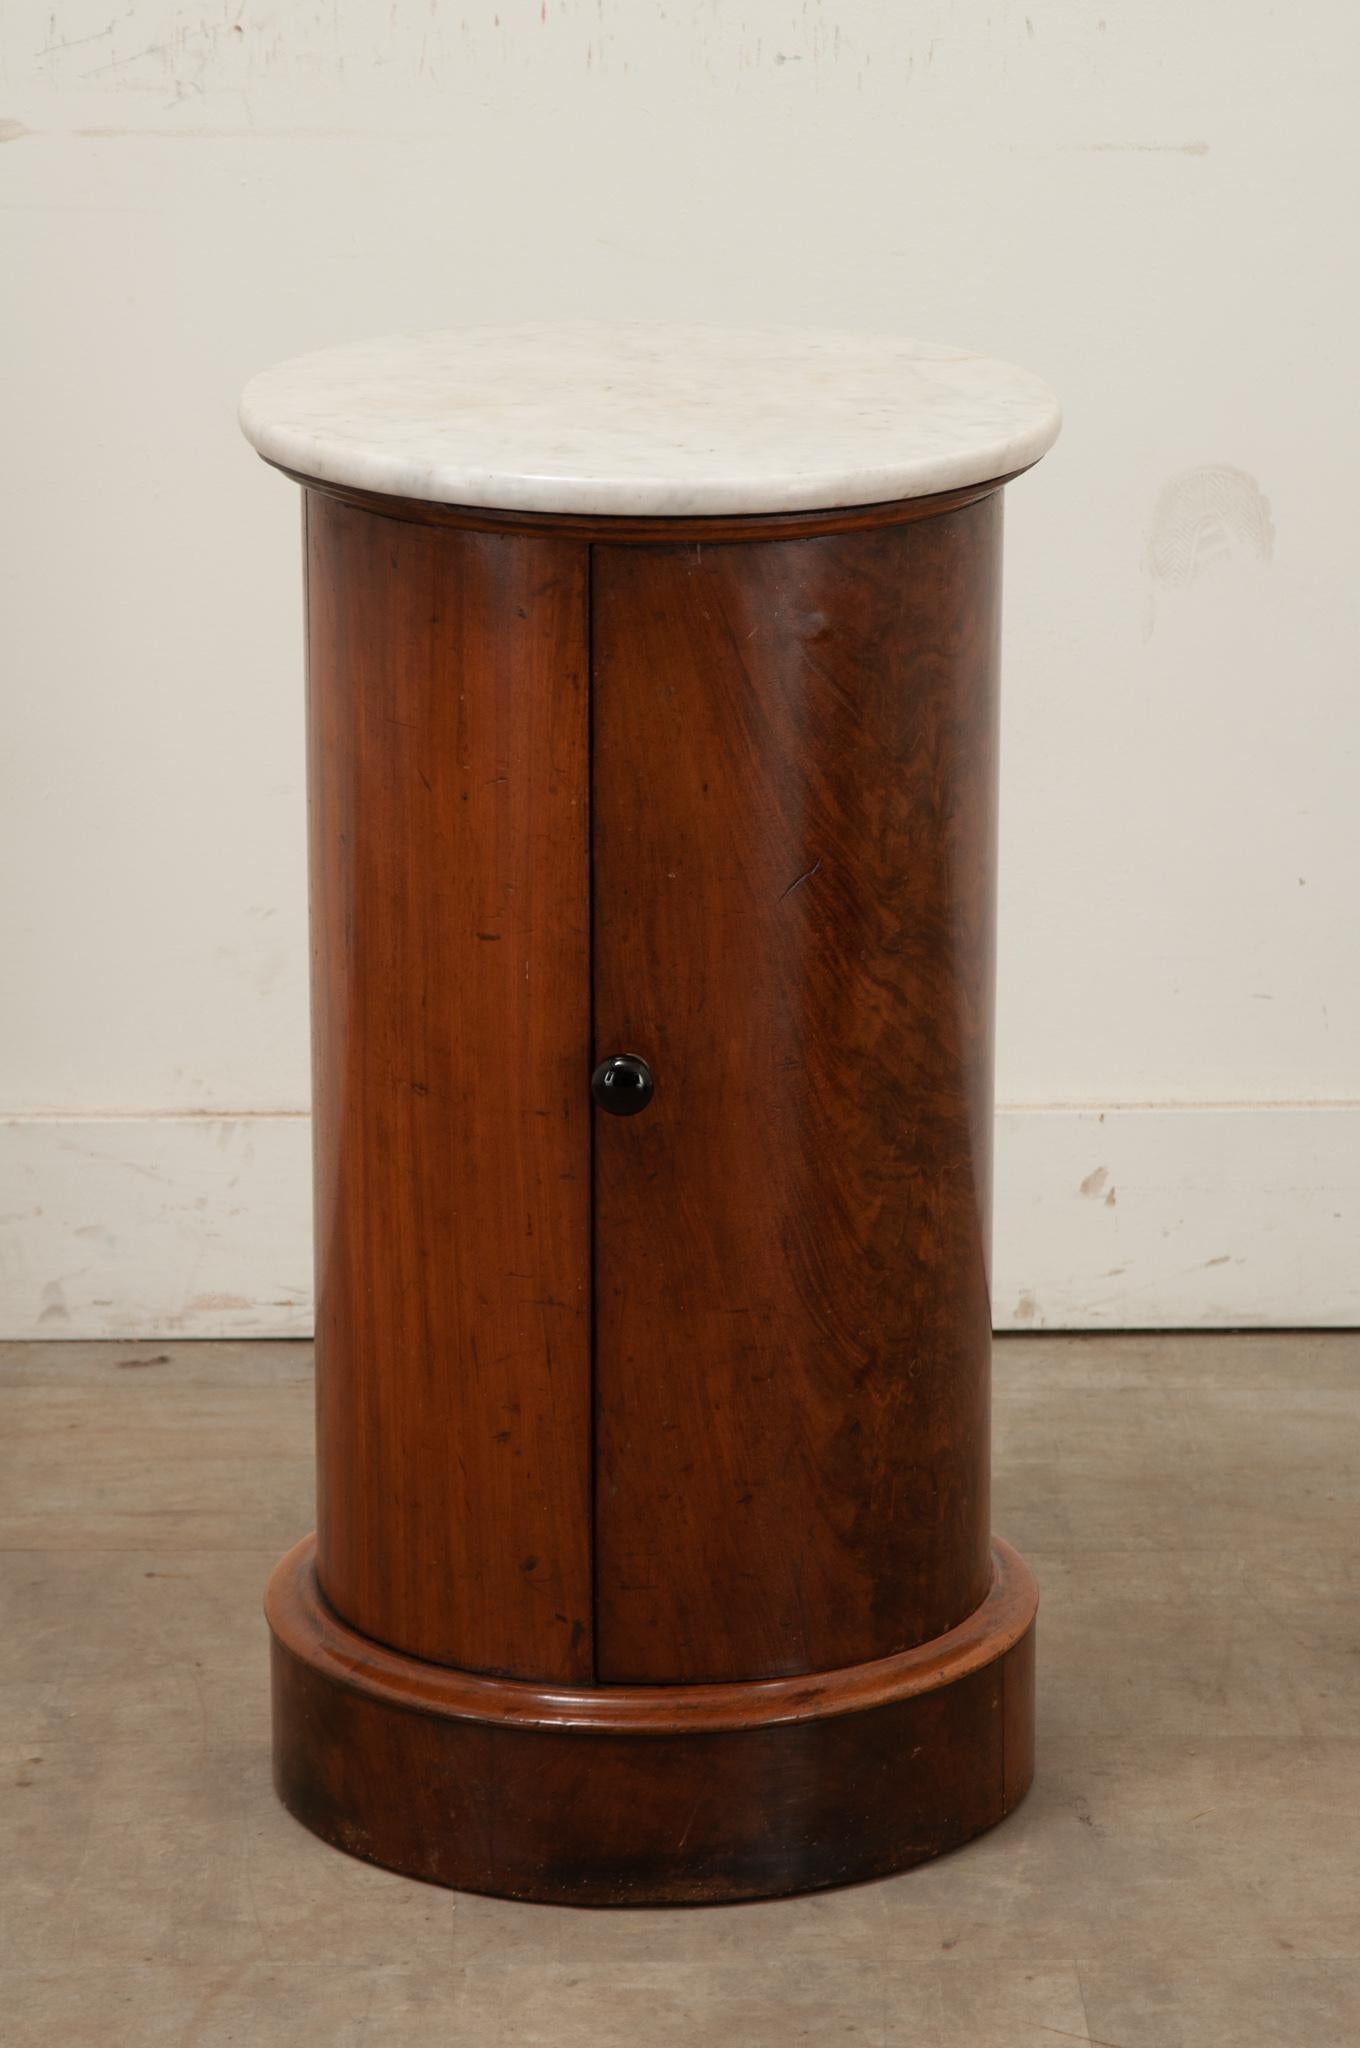 Other English Round Mahogany & Marble Bedside Table For Sale